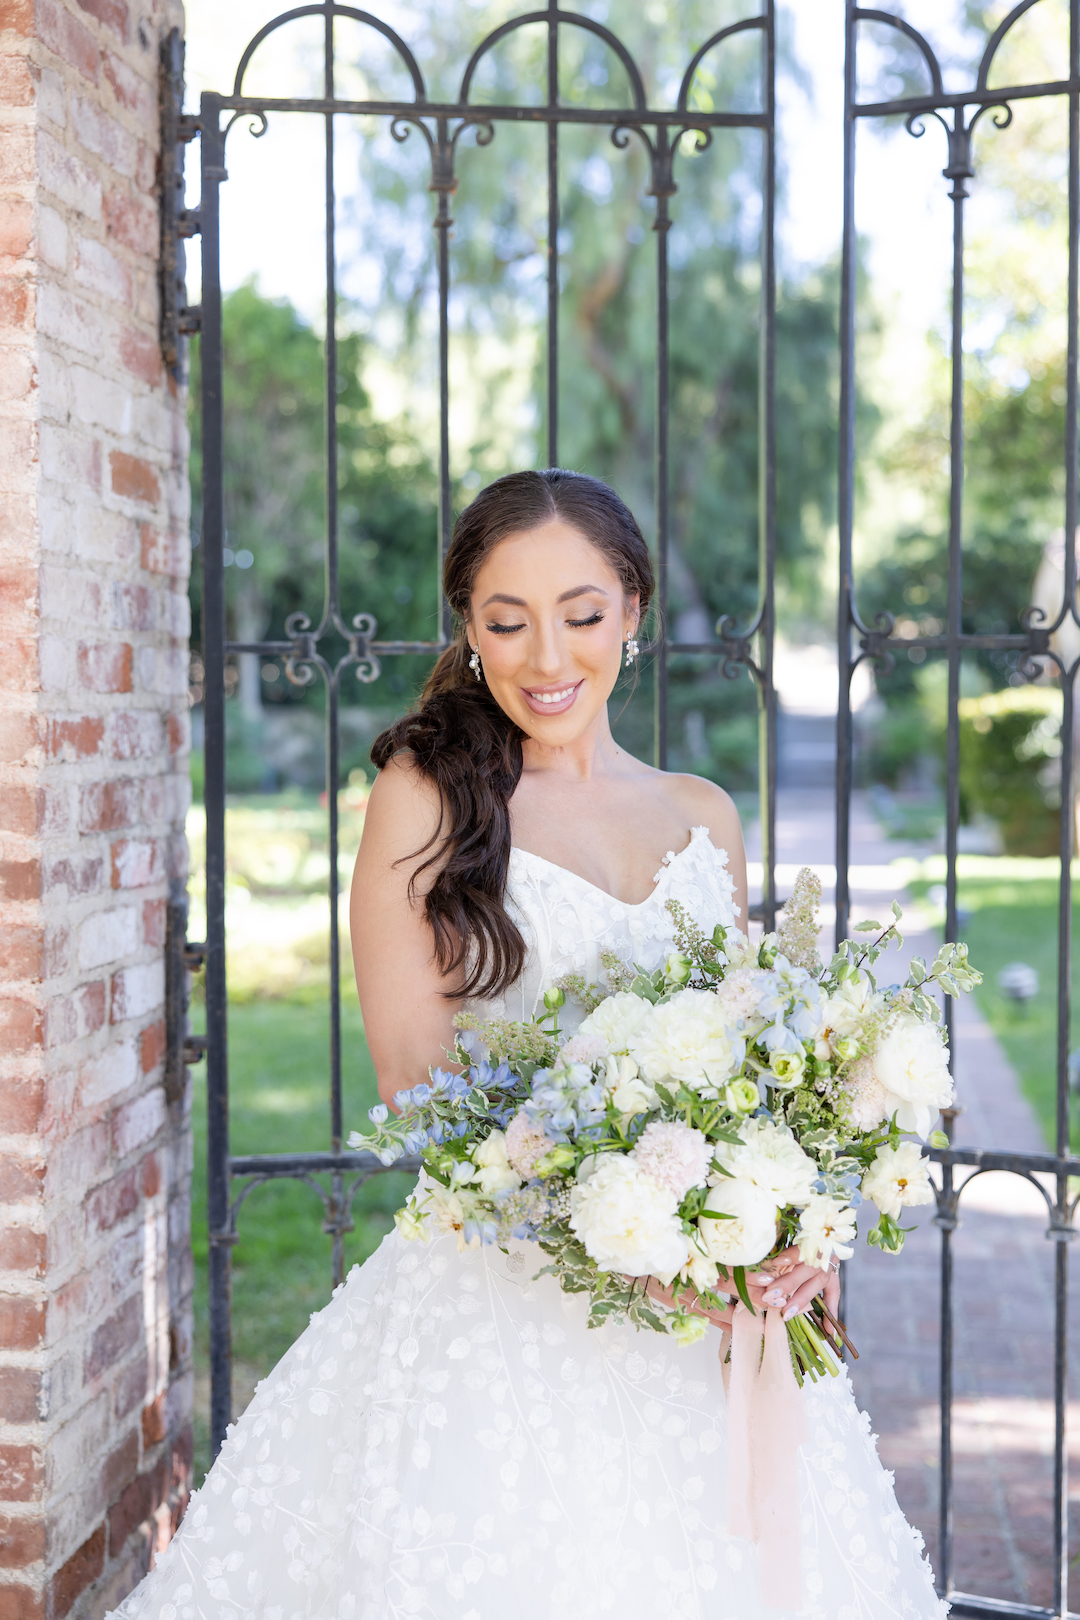 Bride smiling and holding an oversized neutral floral bouquet at Hummingbird Nest Ranch.